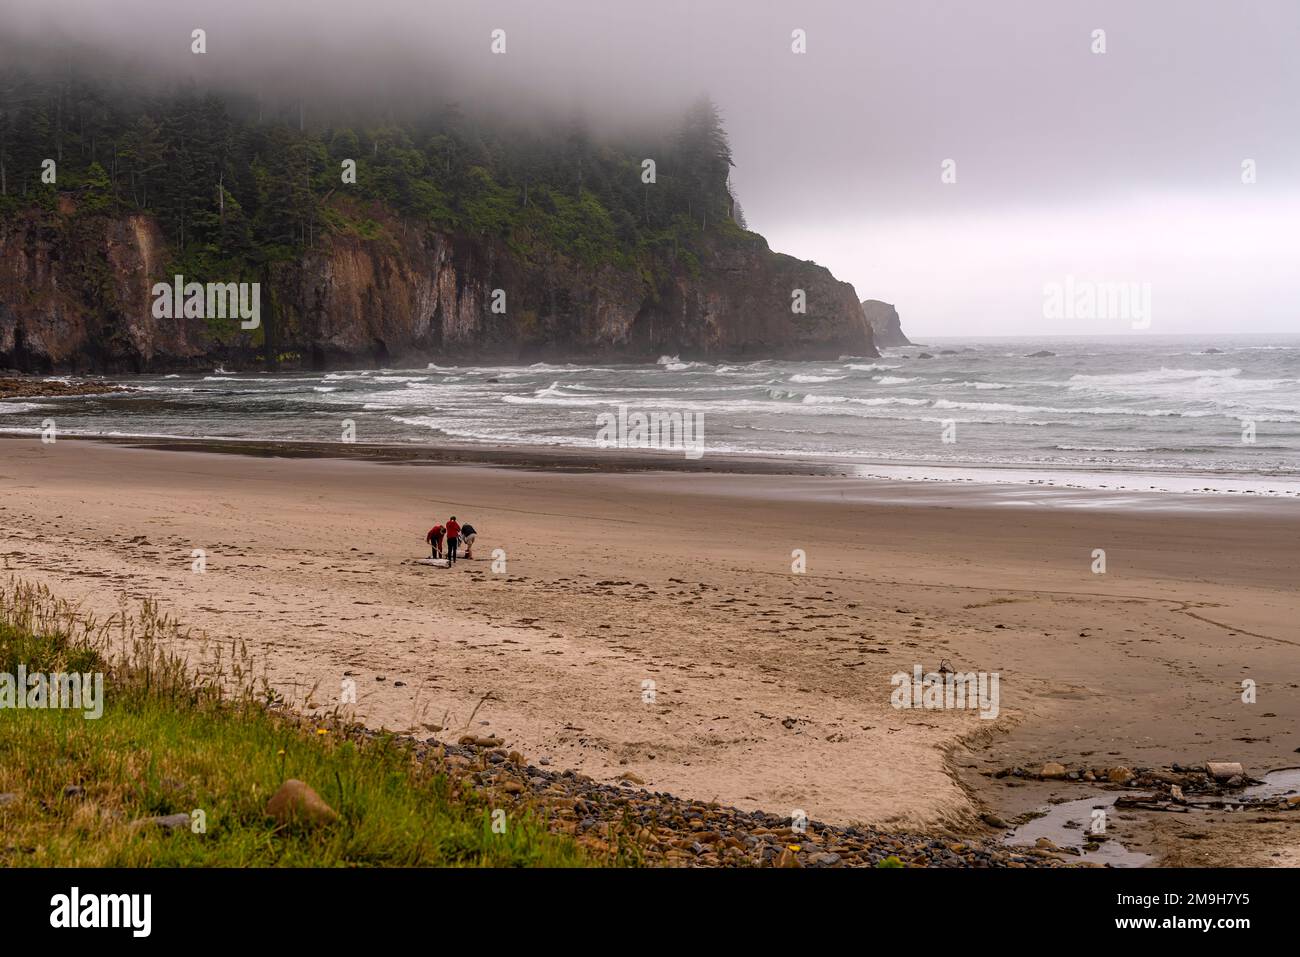 Three people searching for clams on sandy beach, Oregon, USA Stock Photo